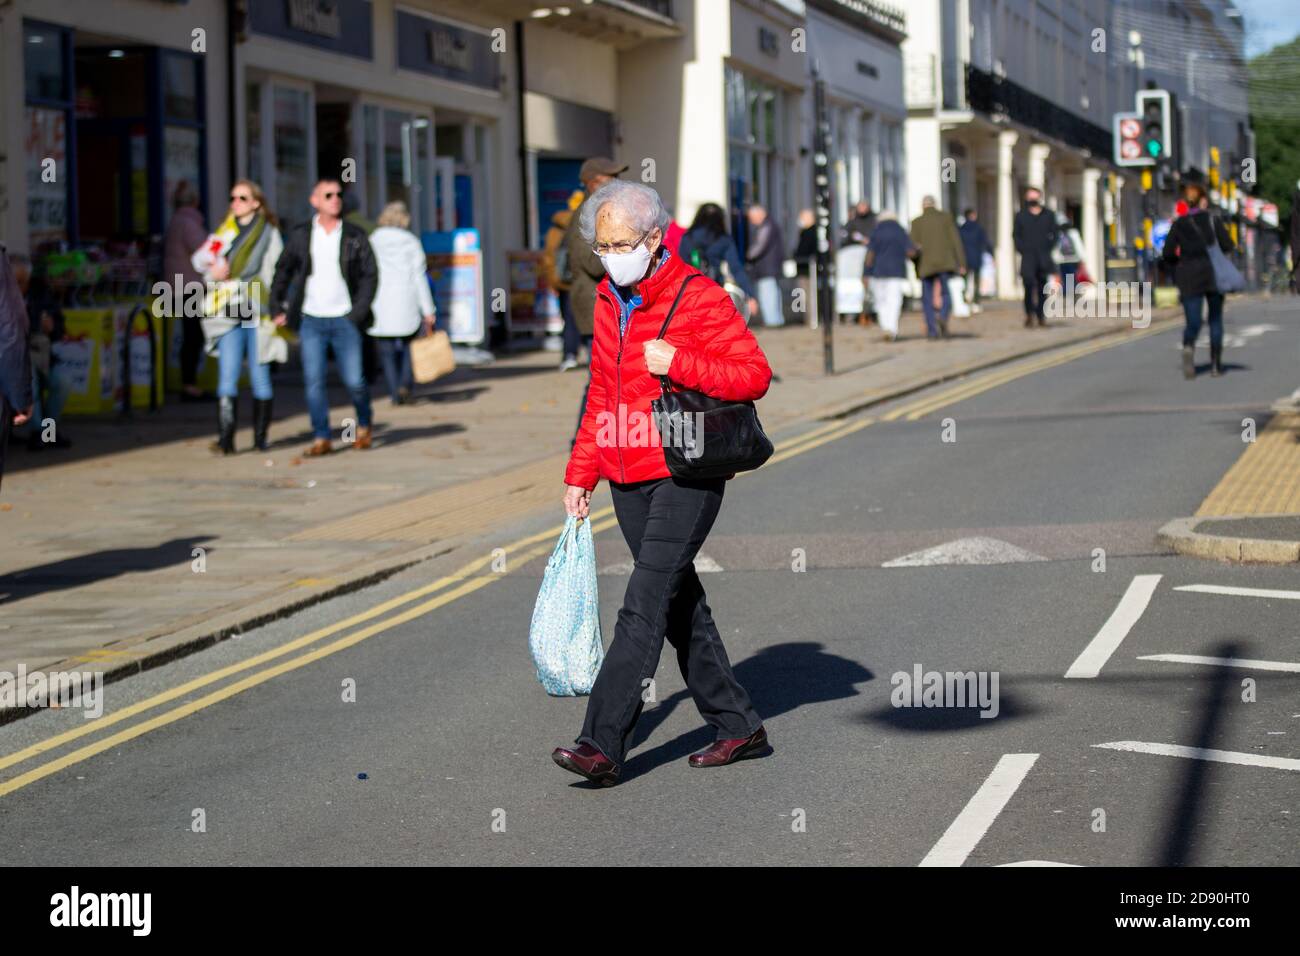 Elderly lady wearing red jacket carrying shopping in Leamington Spa, Warwickshire as another month-long lockdown looms for the UK Stock Photo